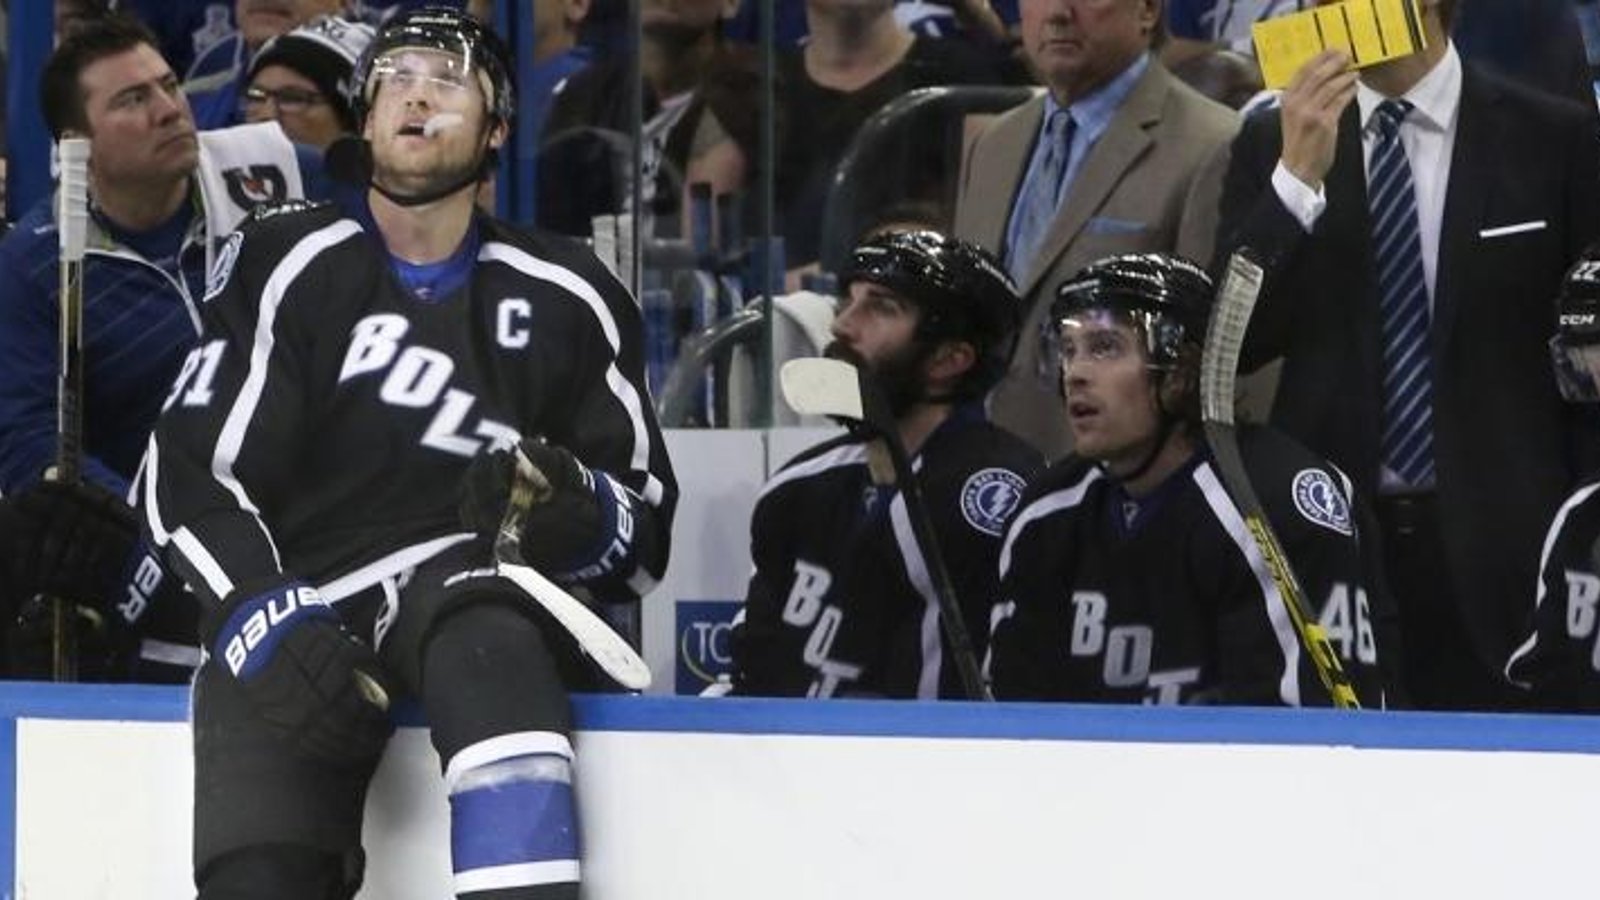 Former Lightning GM believes Stamkos is interested in two Canadian teams.